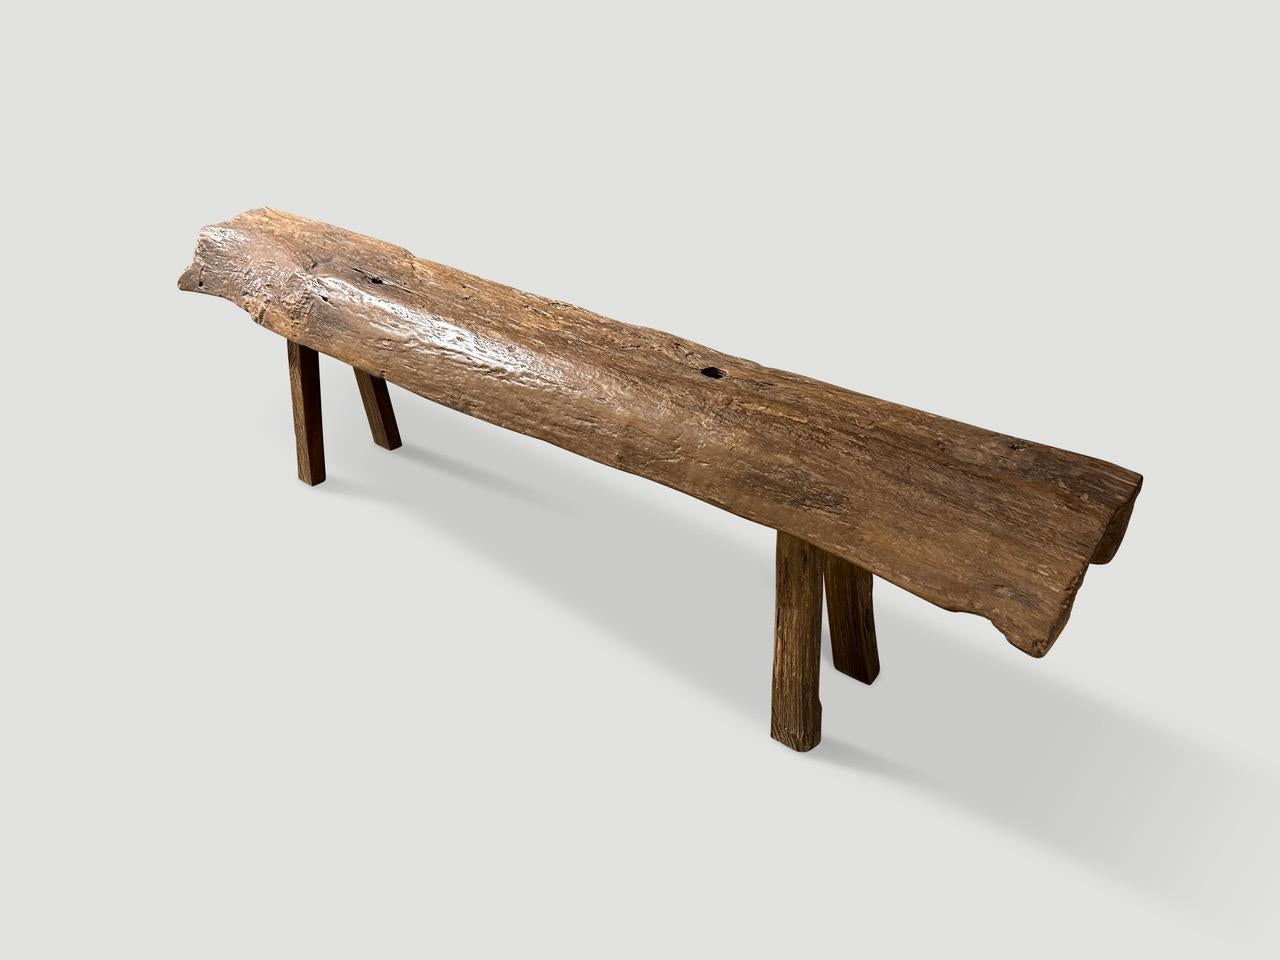 Impressive antique bench with beautiful character and patina is hand made from a single thick teak log. Circa 1950.

This bench was hand made in the spirit of Wabi-Sabi, a Japanese philosophy that beauty can be found in imperfection and